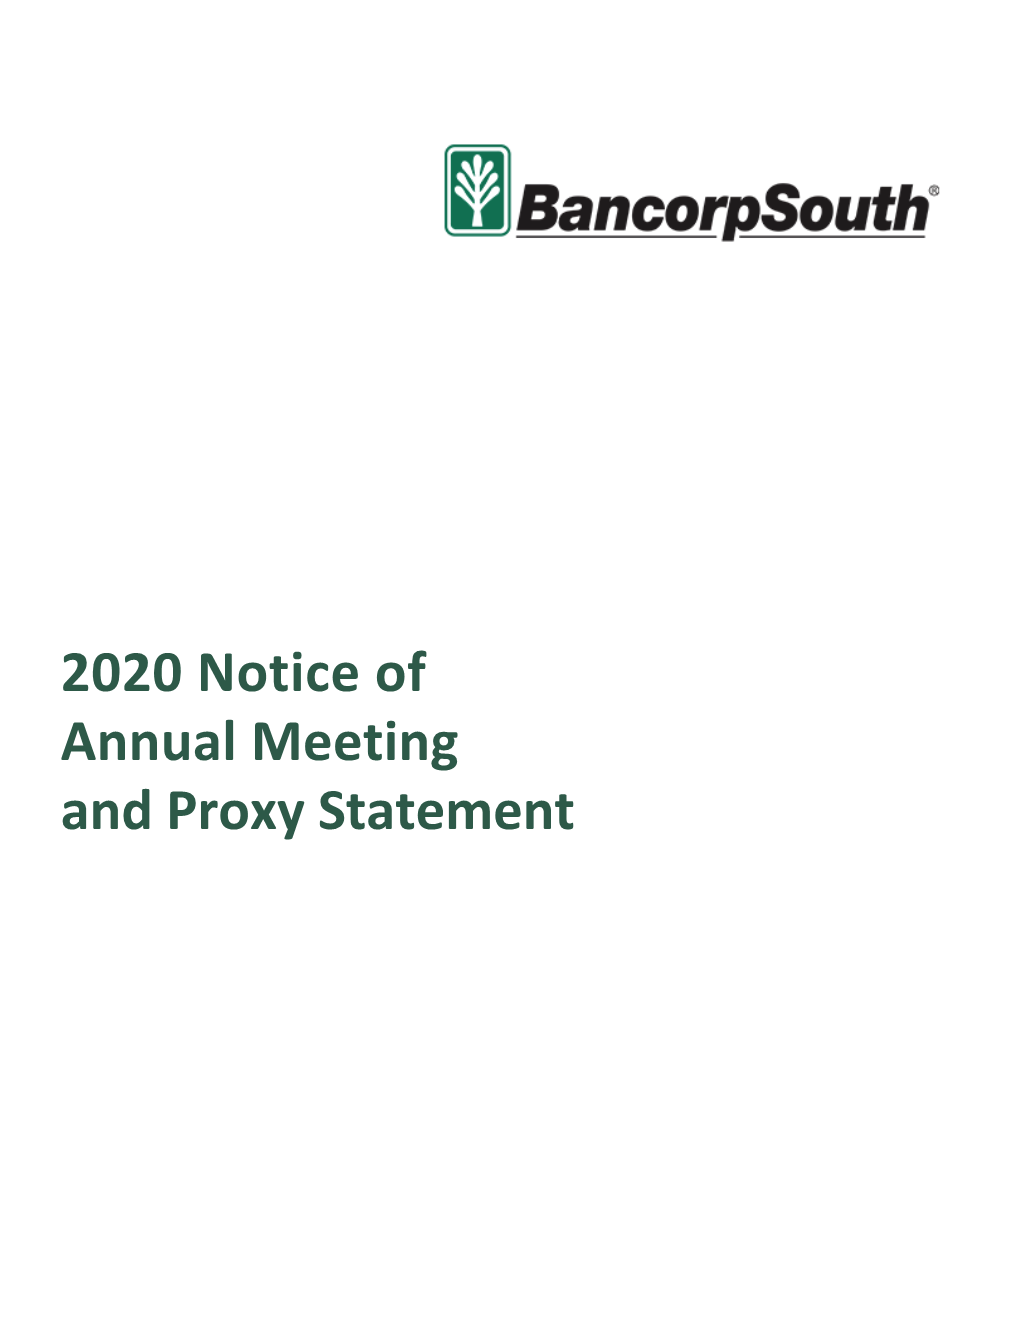 2020 Notice of Annual Meeting and Proxy Statement